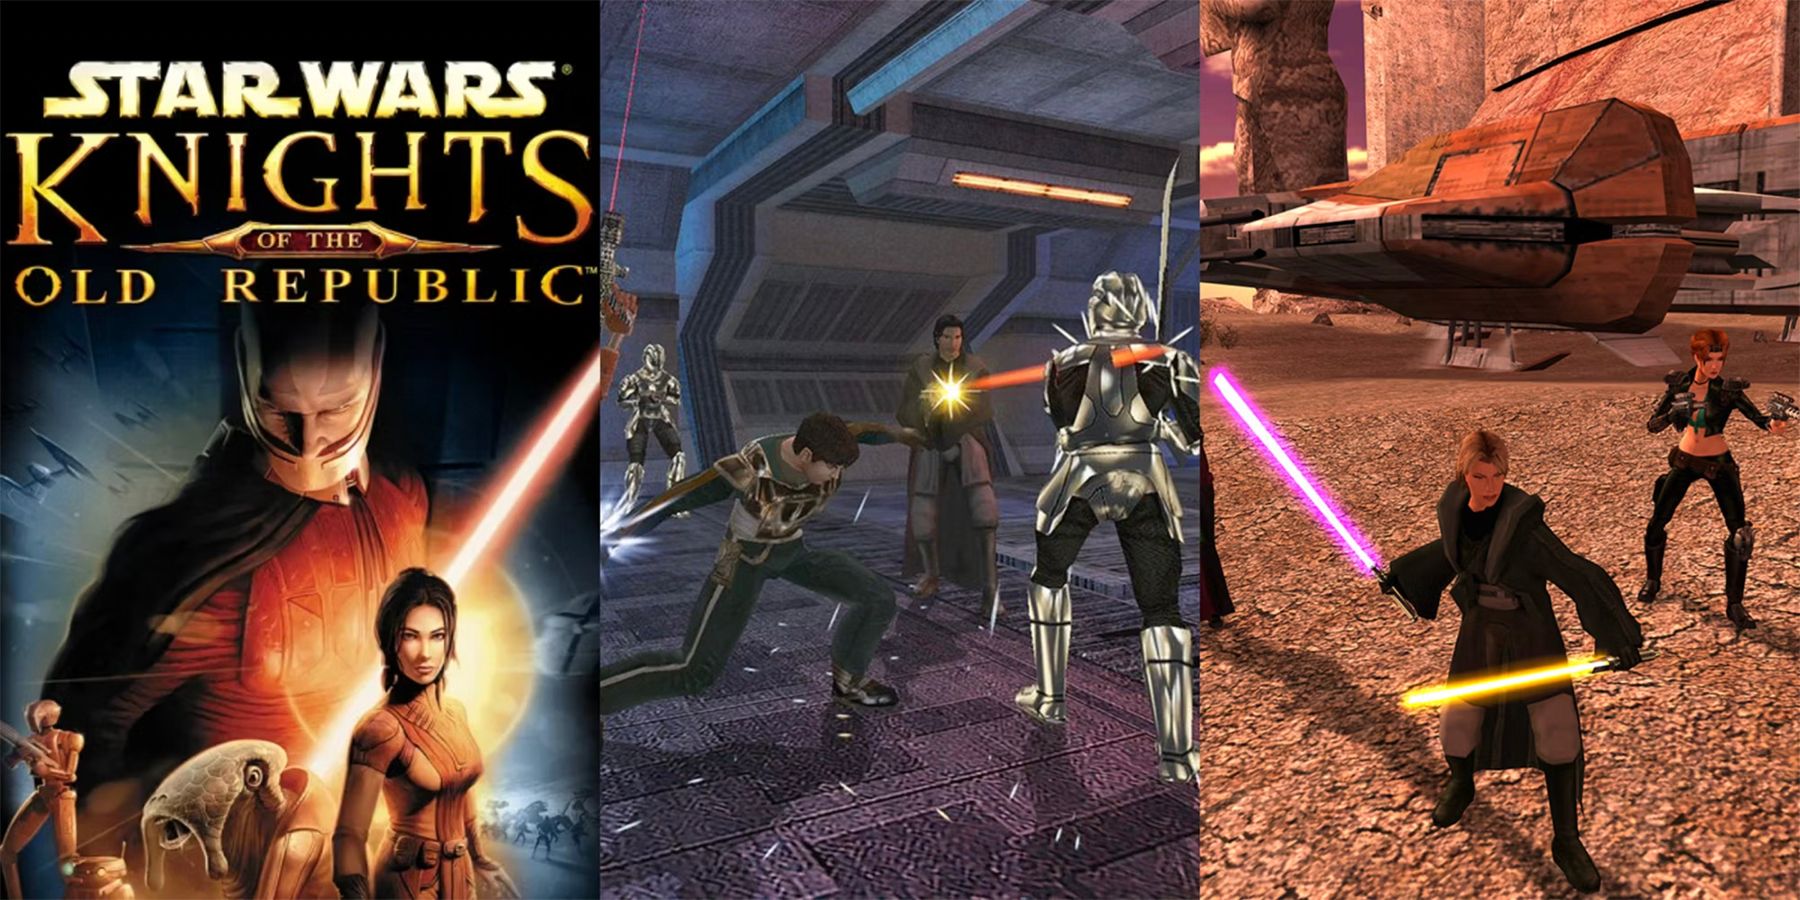 Star wars knight of the old republic 2 русификатор steam фото 79